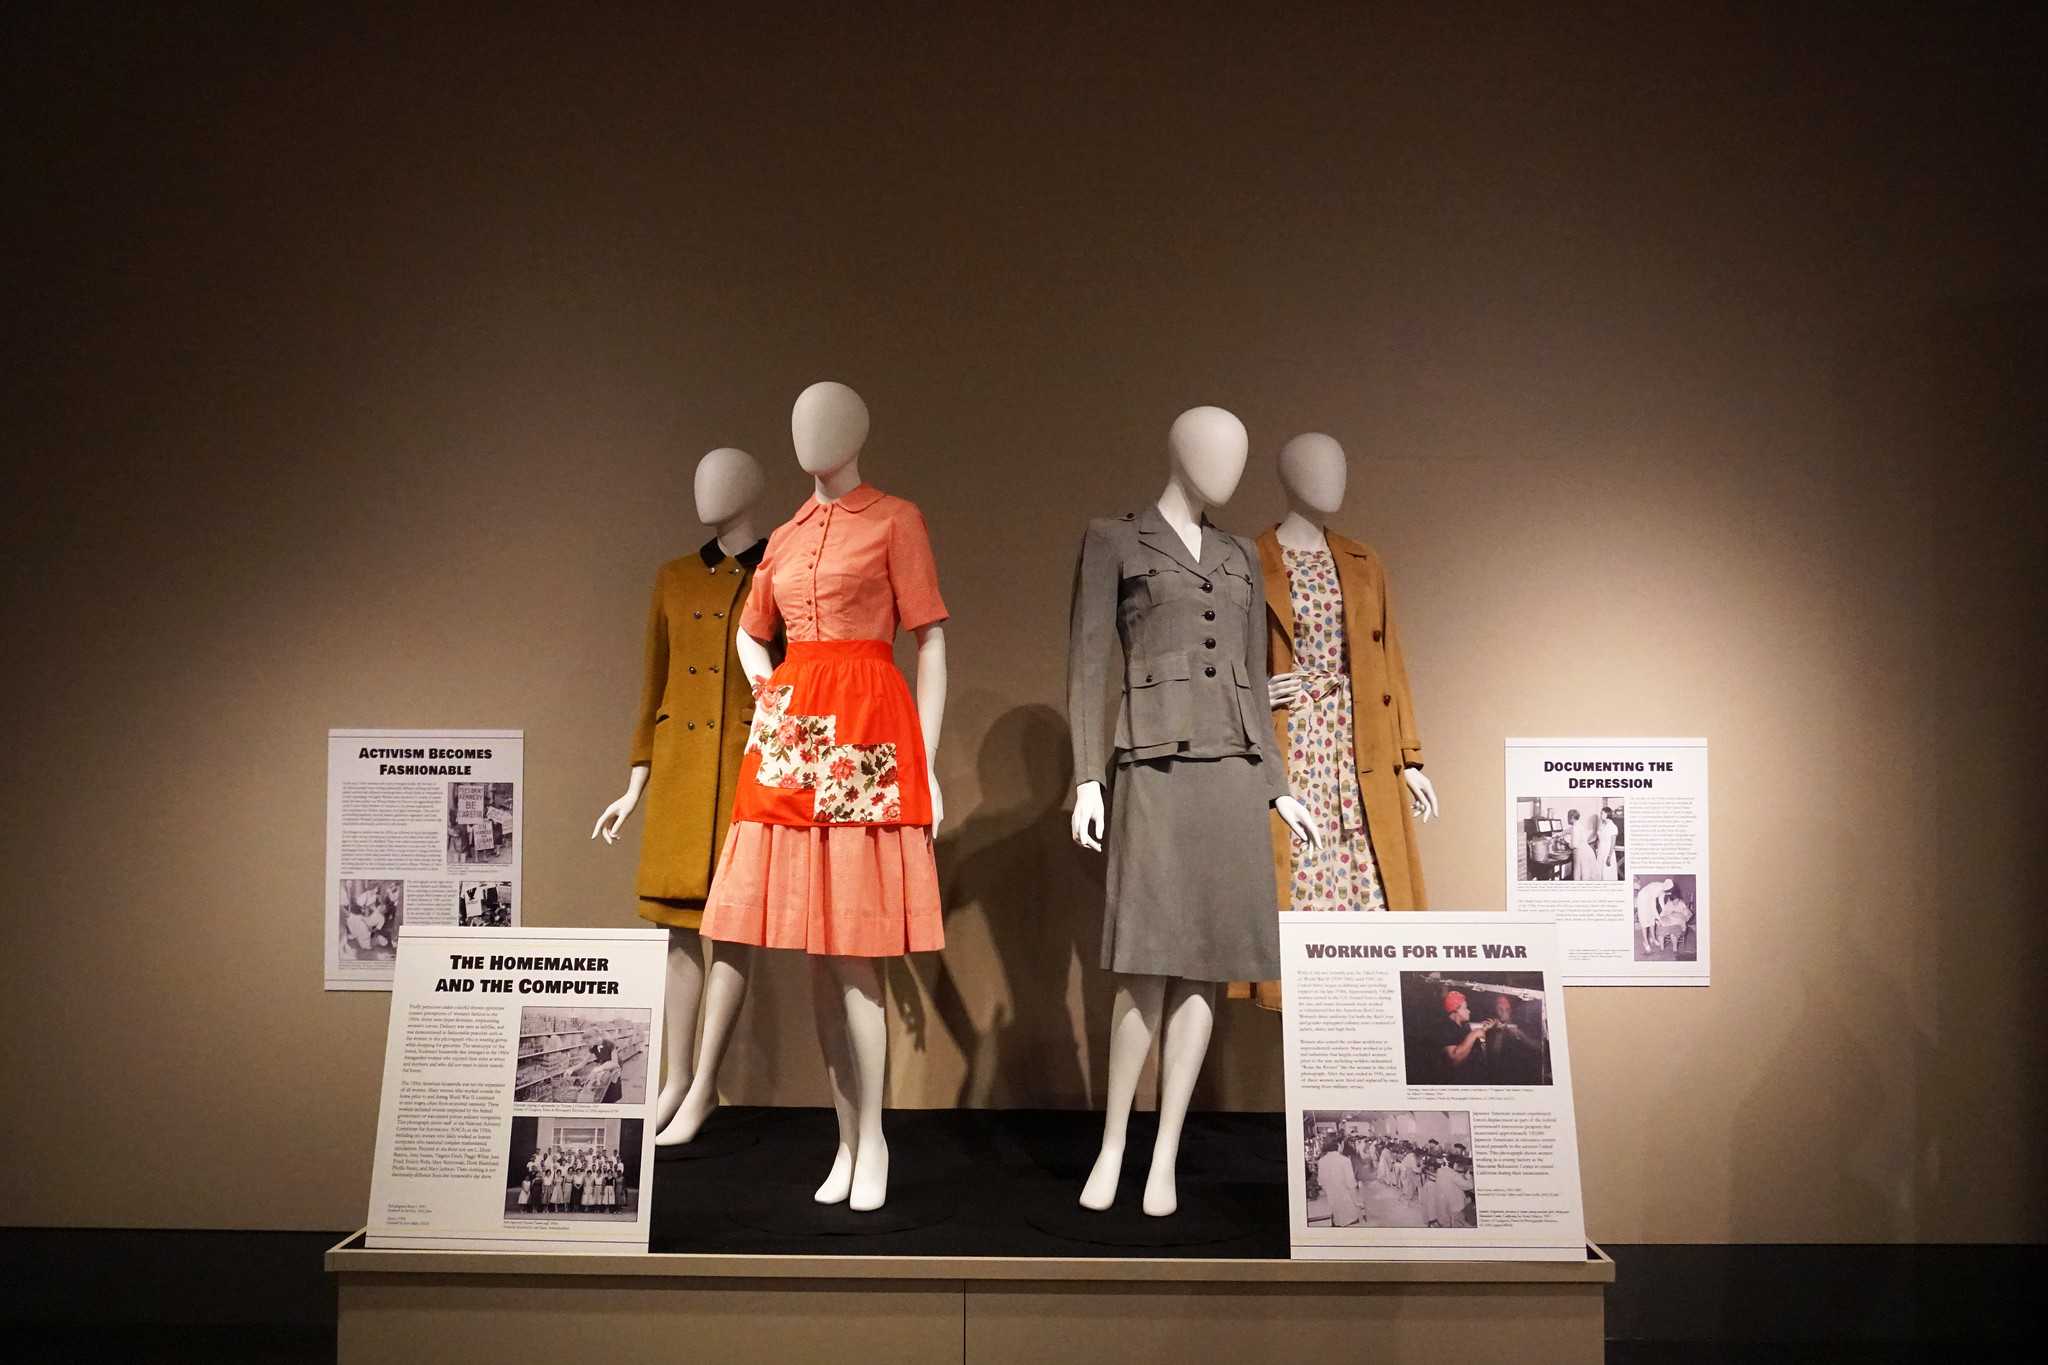 The R.E.S.P.E.C.T. the Dress: Clothing and Activism in U.S. Women’s History exhibit at the Avenir Museum of Design